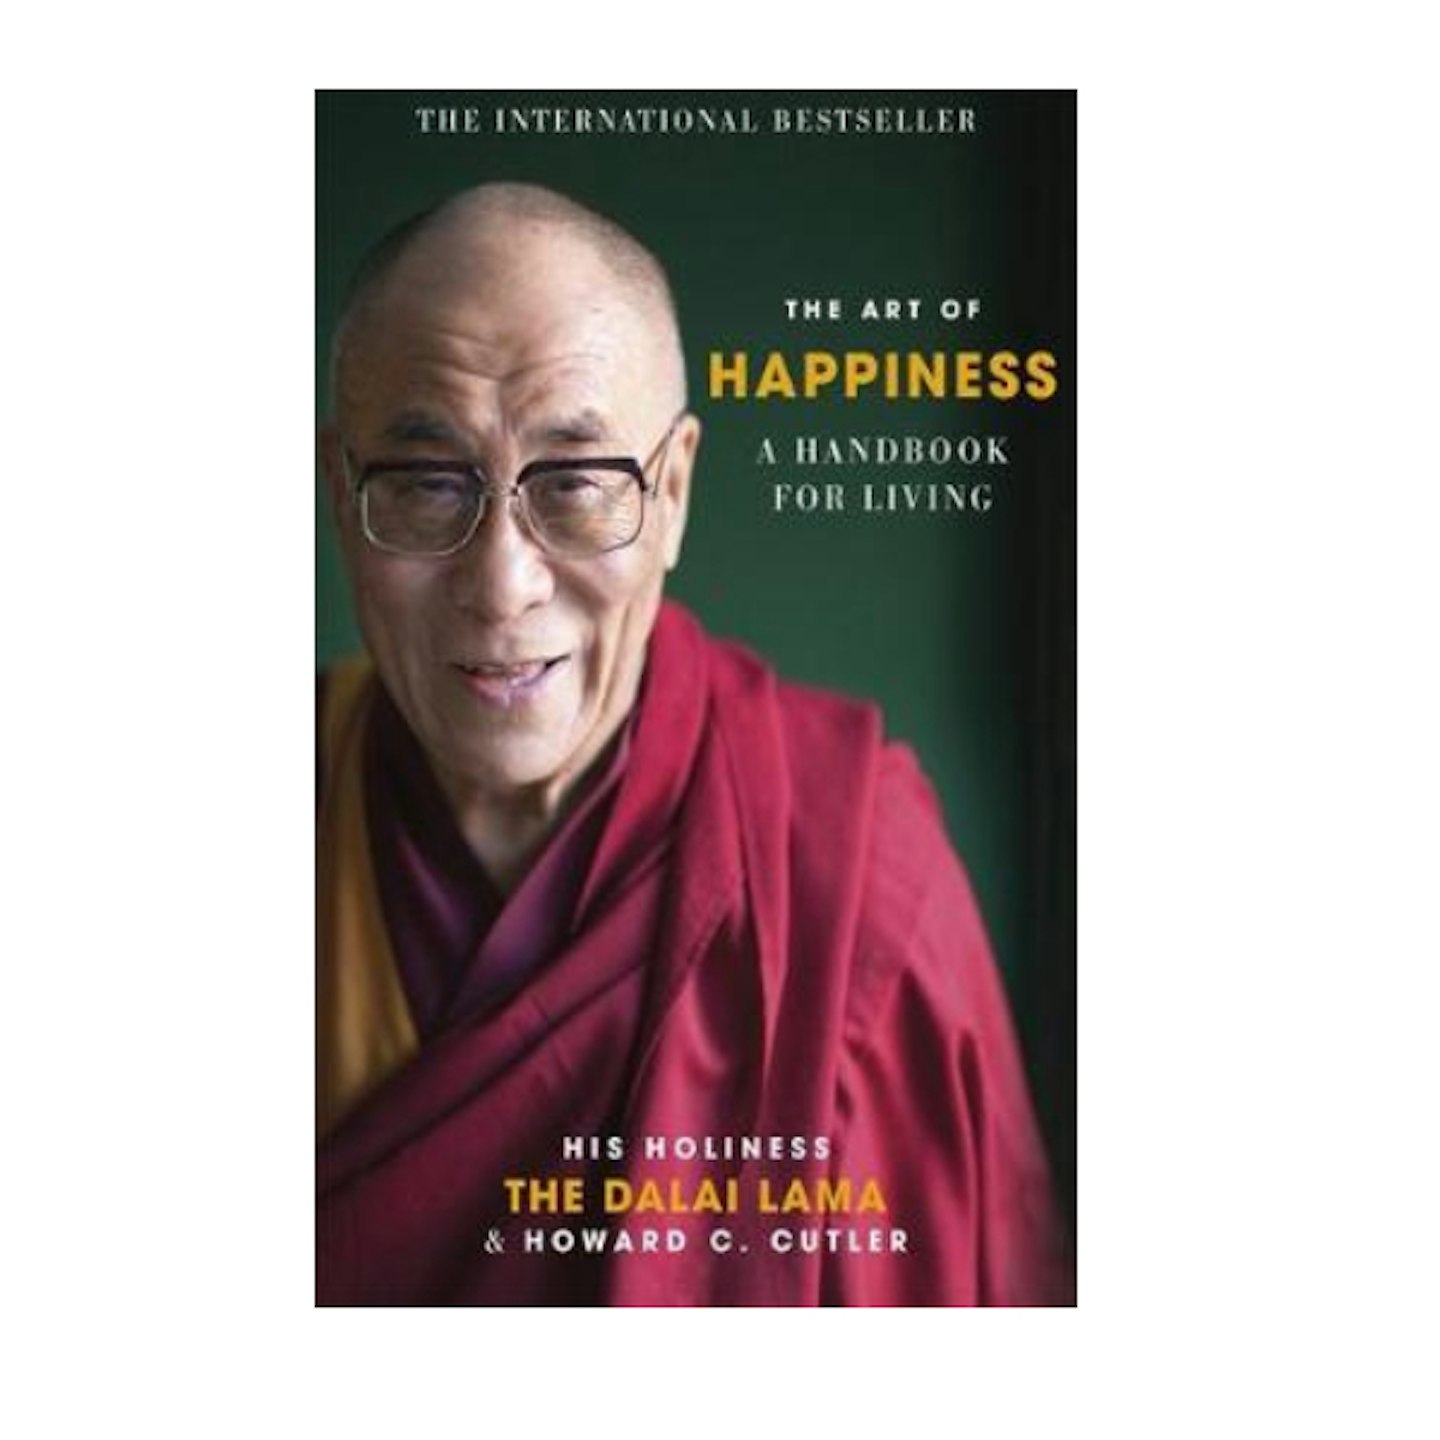 The art of happiness book cover